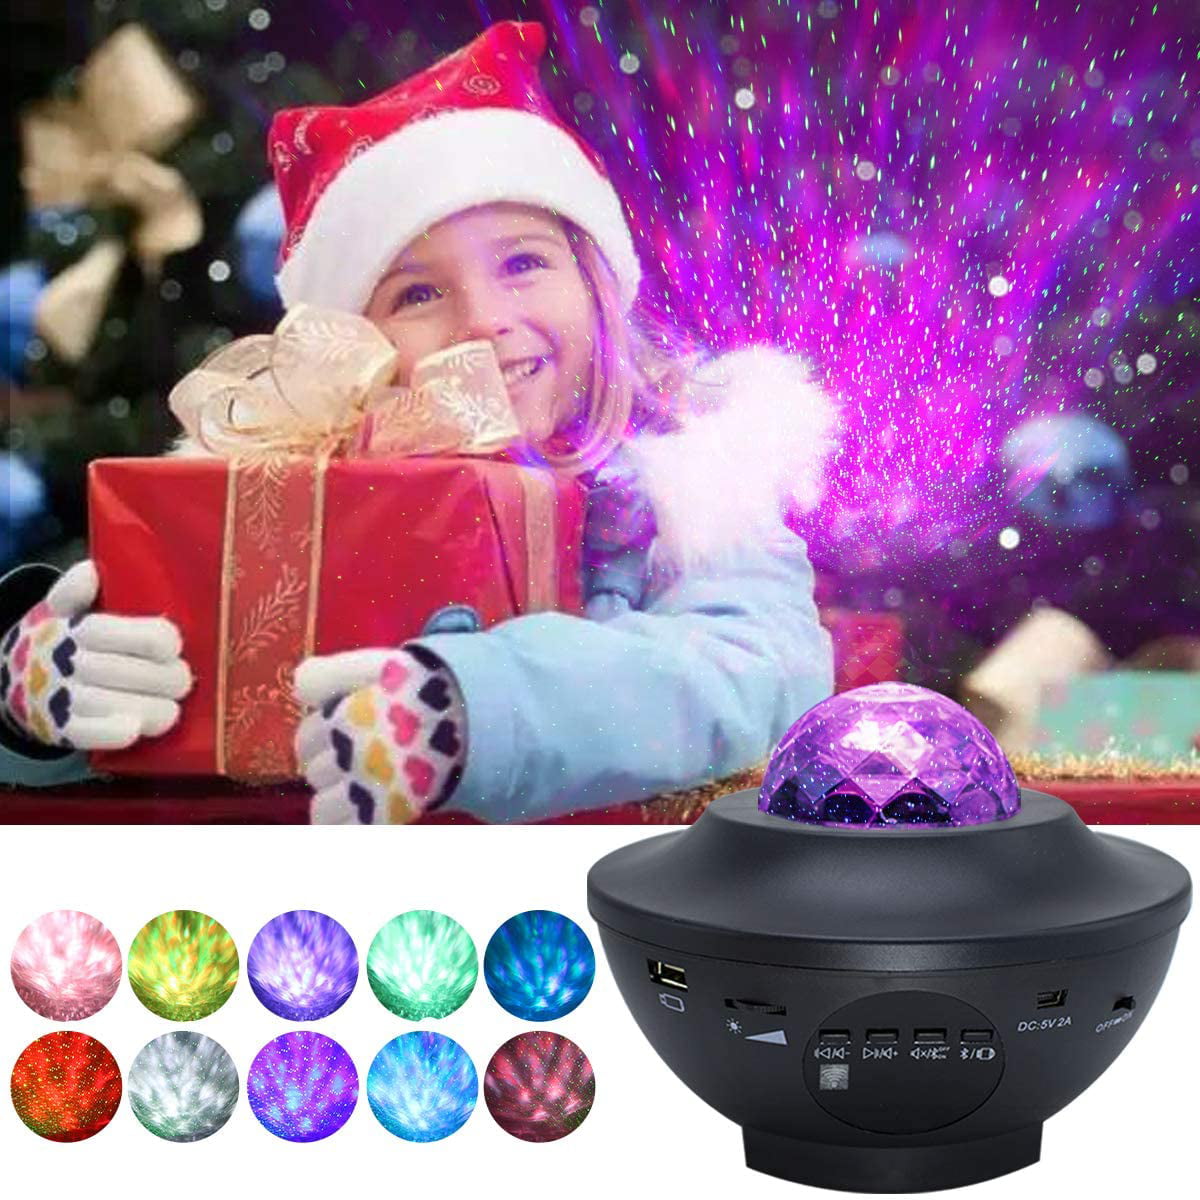 Bluetooth Speaker Star Projector with 10 Lighting Modes AZIMOM Starry Night Light Projector for Kids Star Light Projector for Decor Party Wedding Birthday Music Player &Timer 